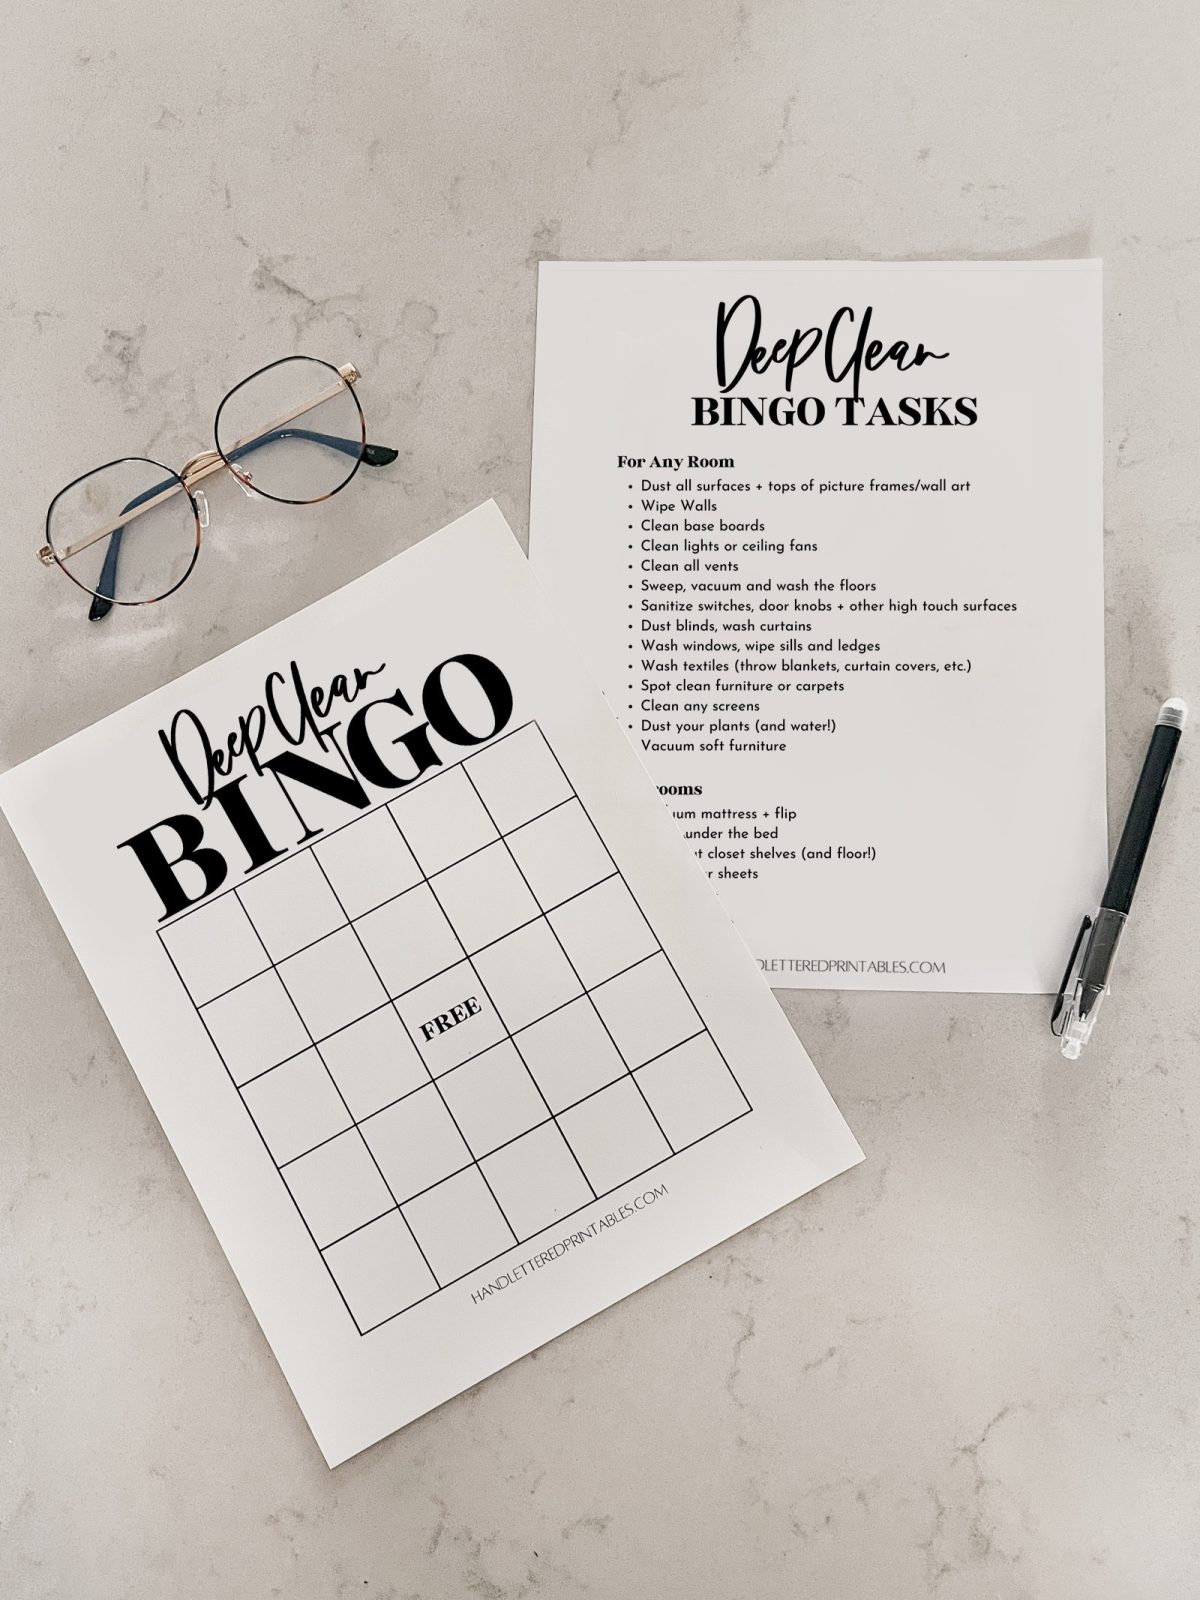 Deep Clean bingo and checklist printed on counter with pen and glasses